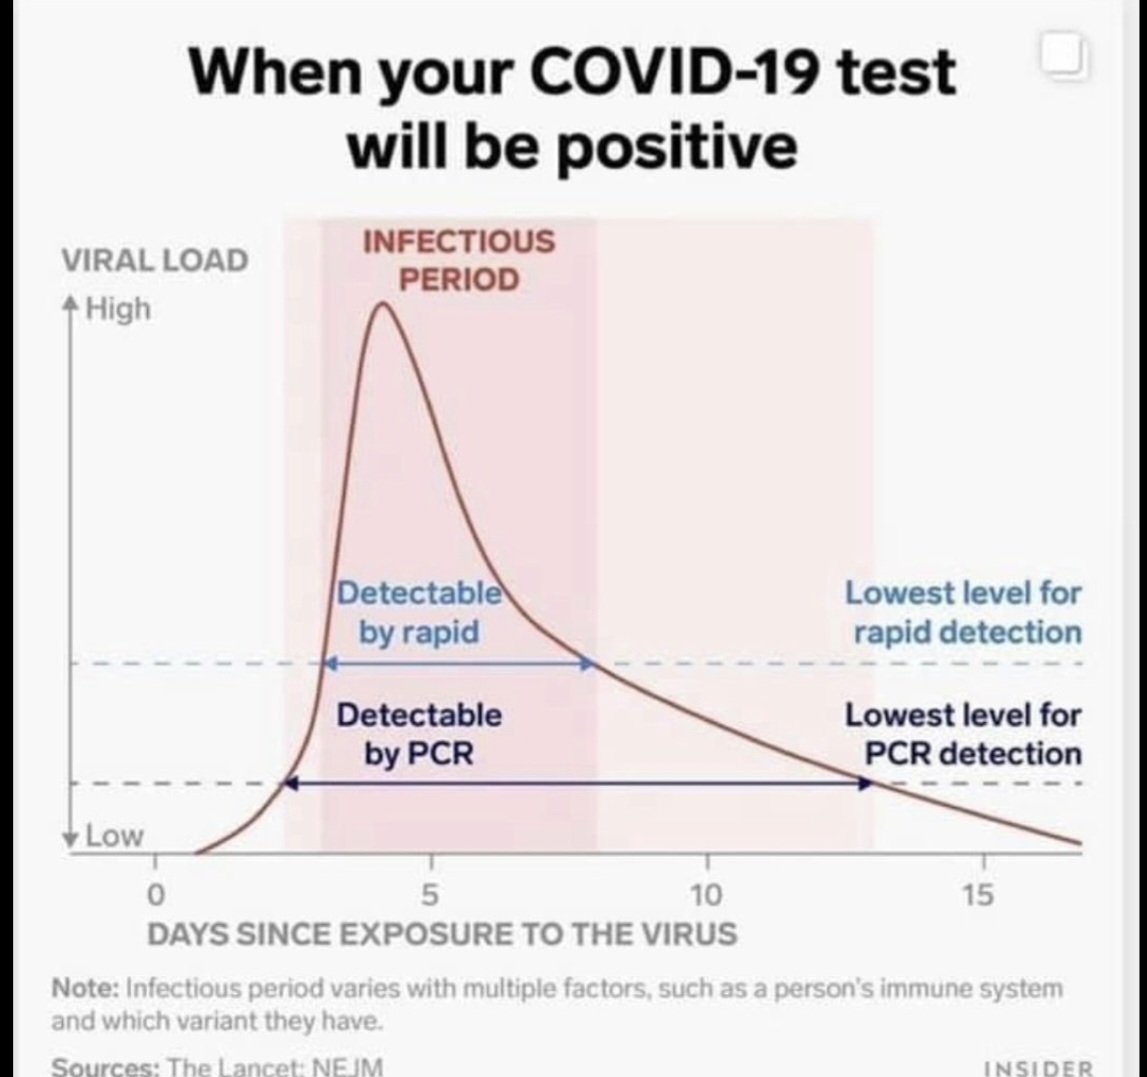 When your COVID-19 test will be positive